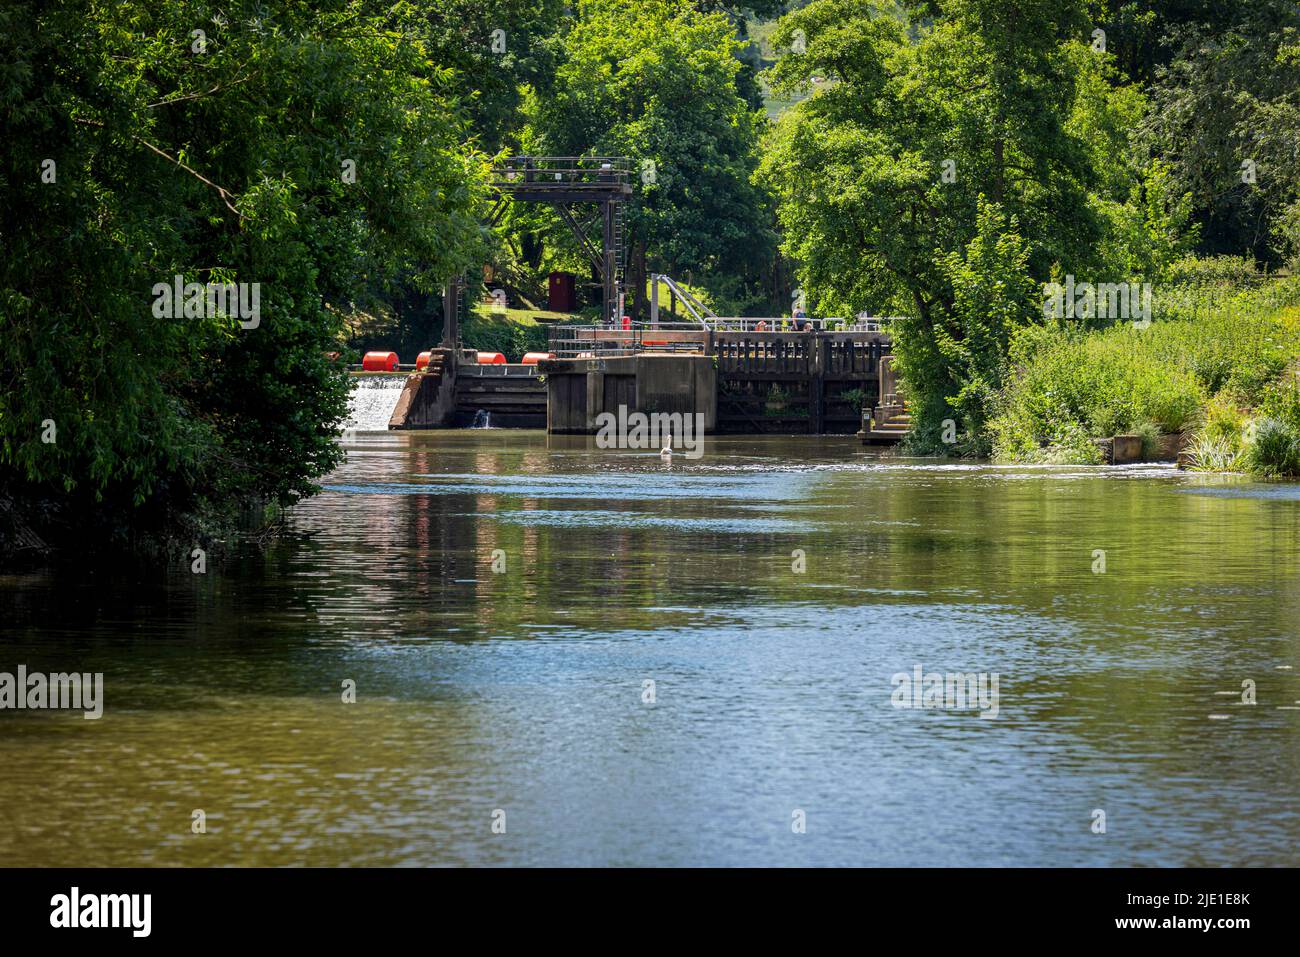 Teston Lock on the River Medway near Maidstone in Kent, England Stock Photo